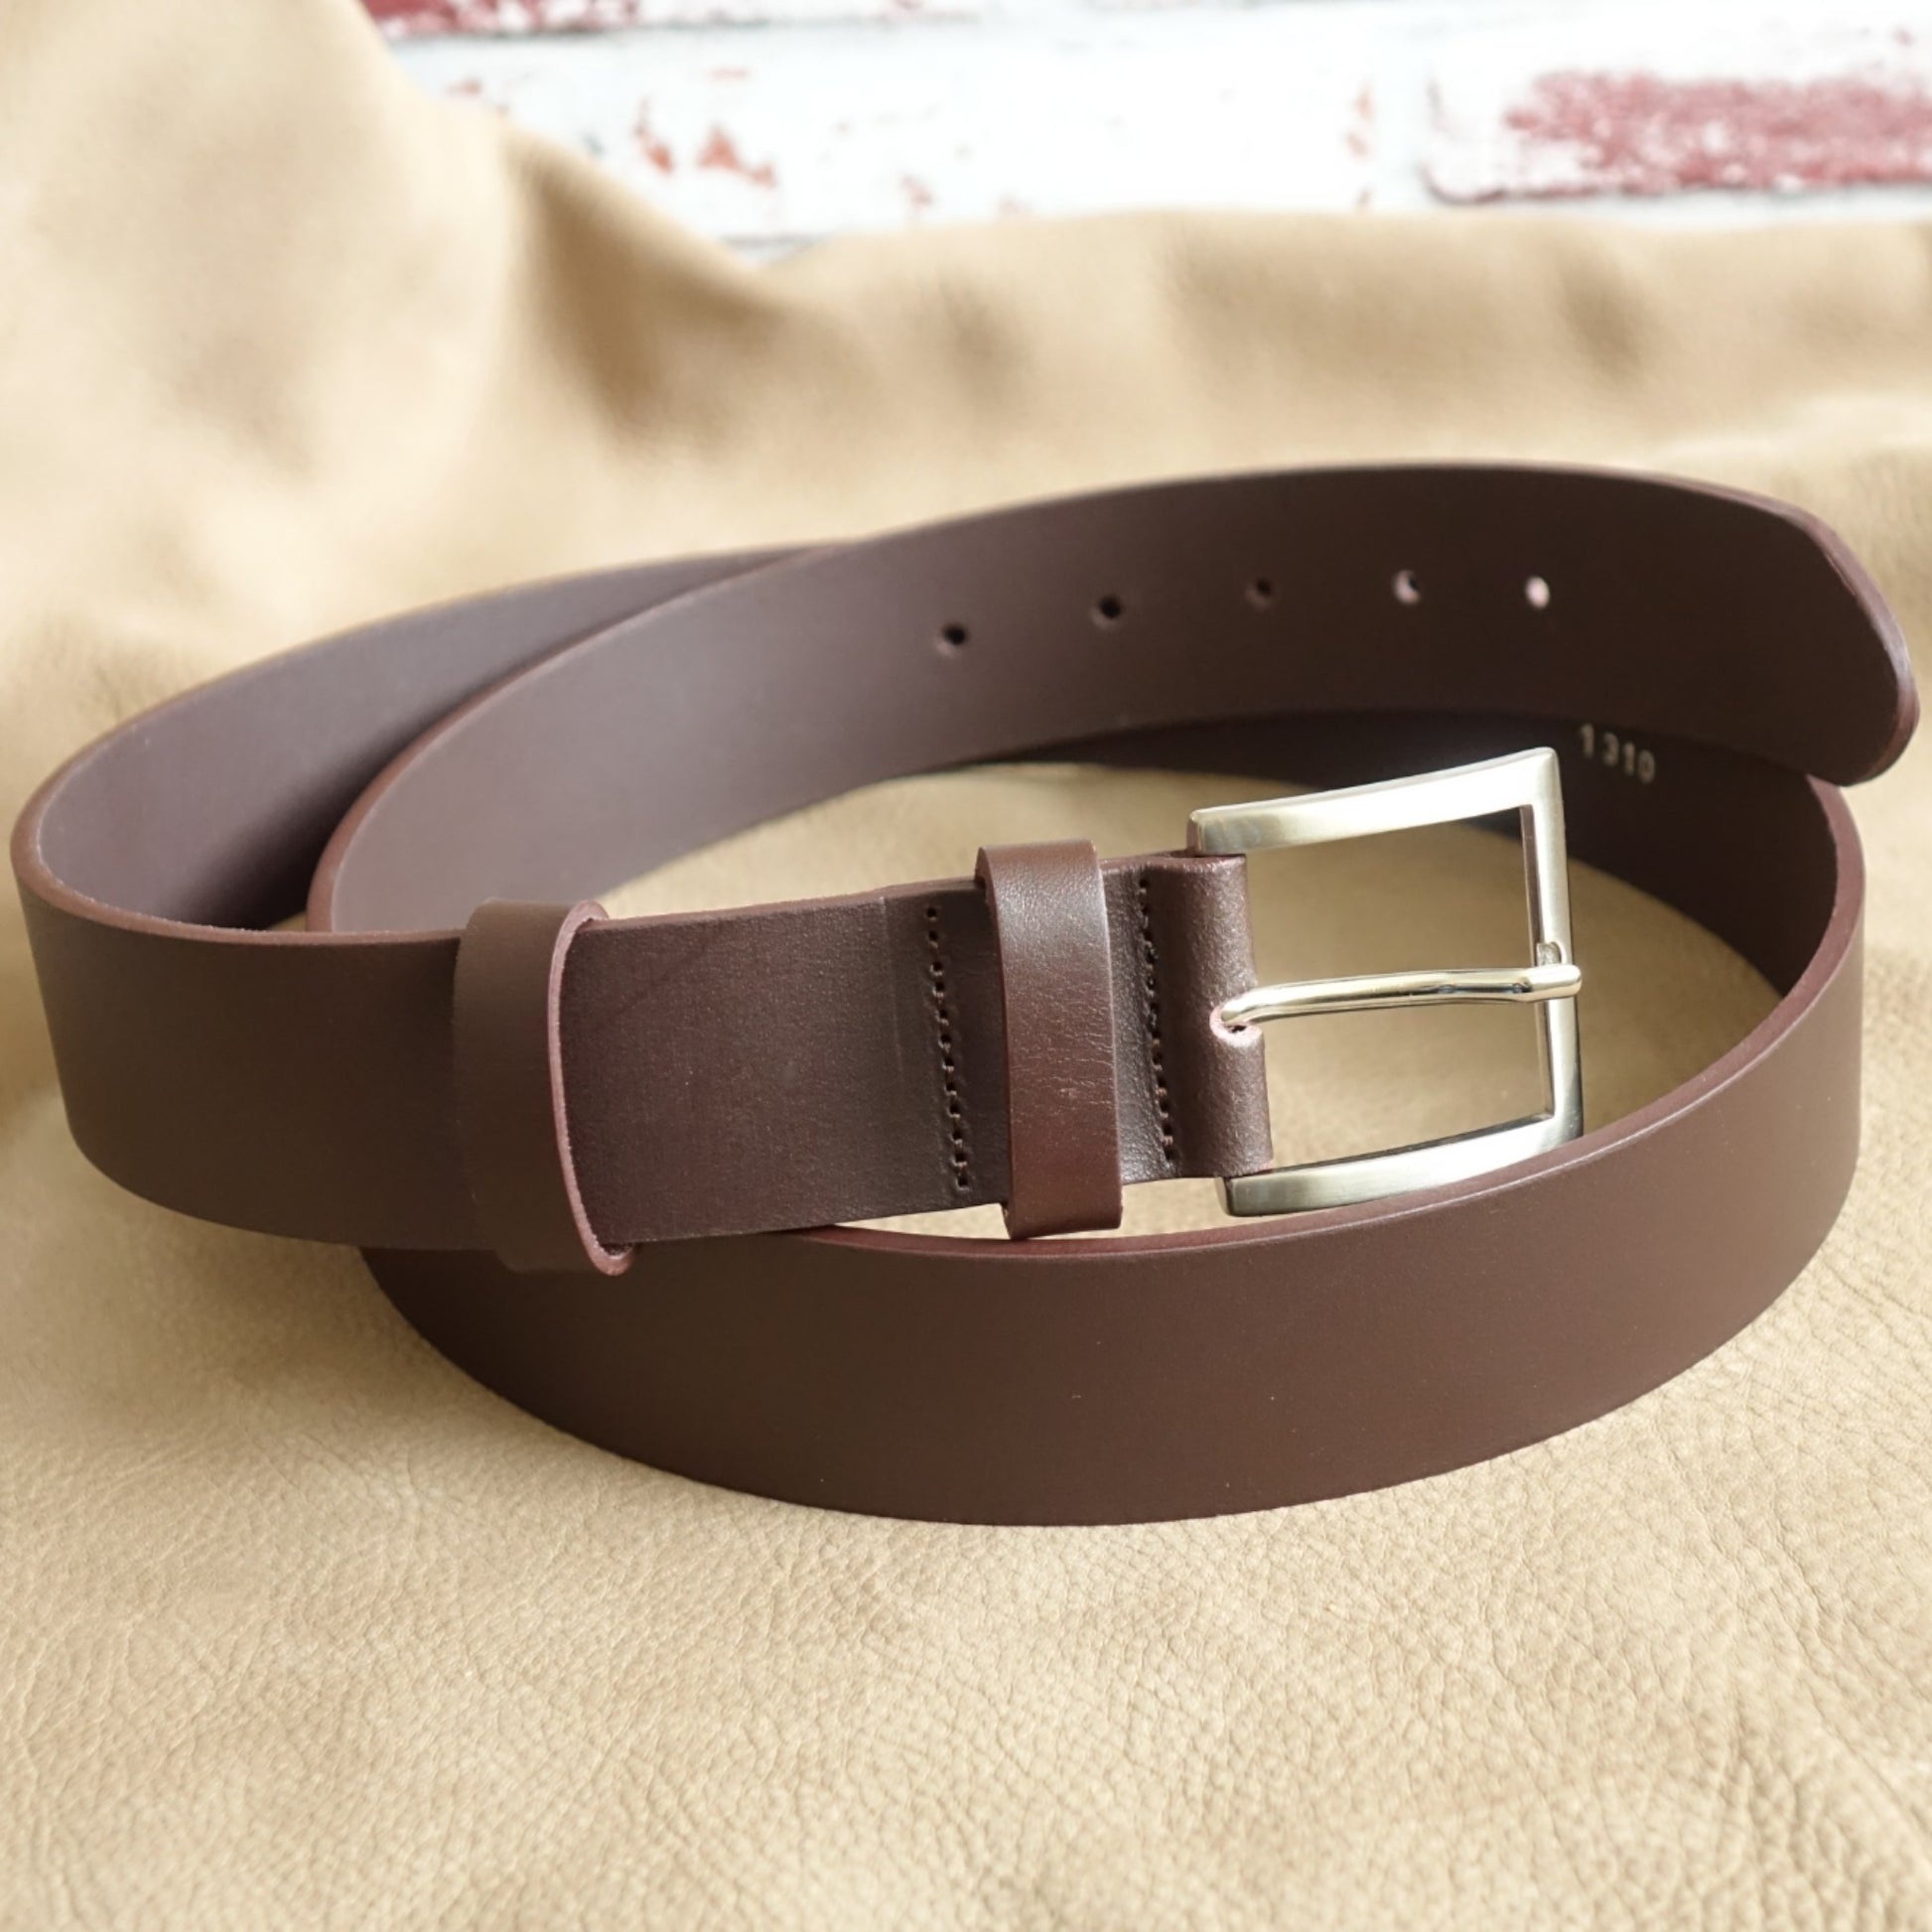 rgc handmade crafts leather belt brown for men and women 1